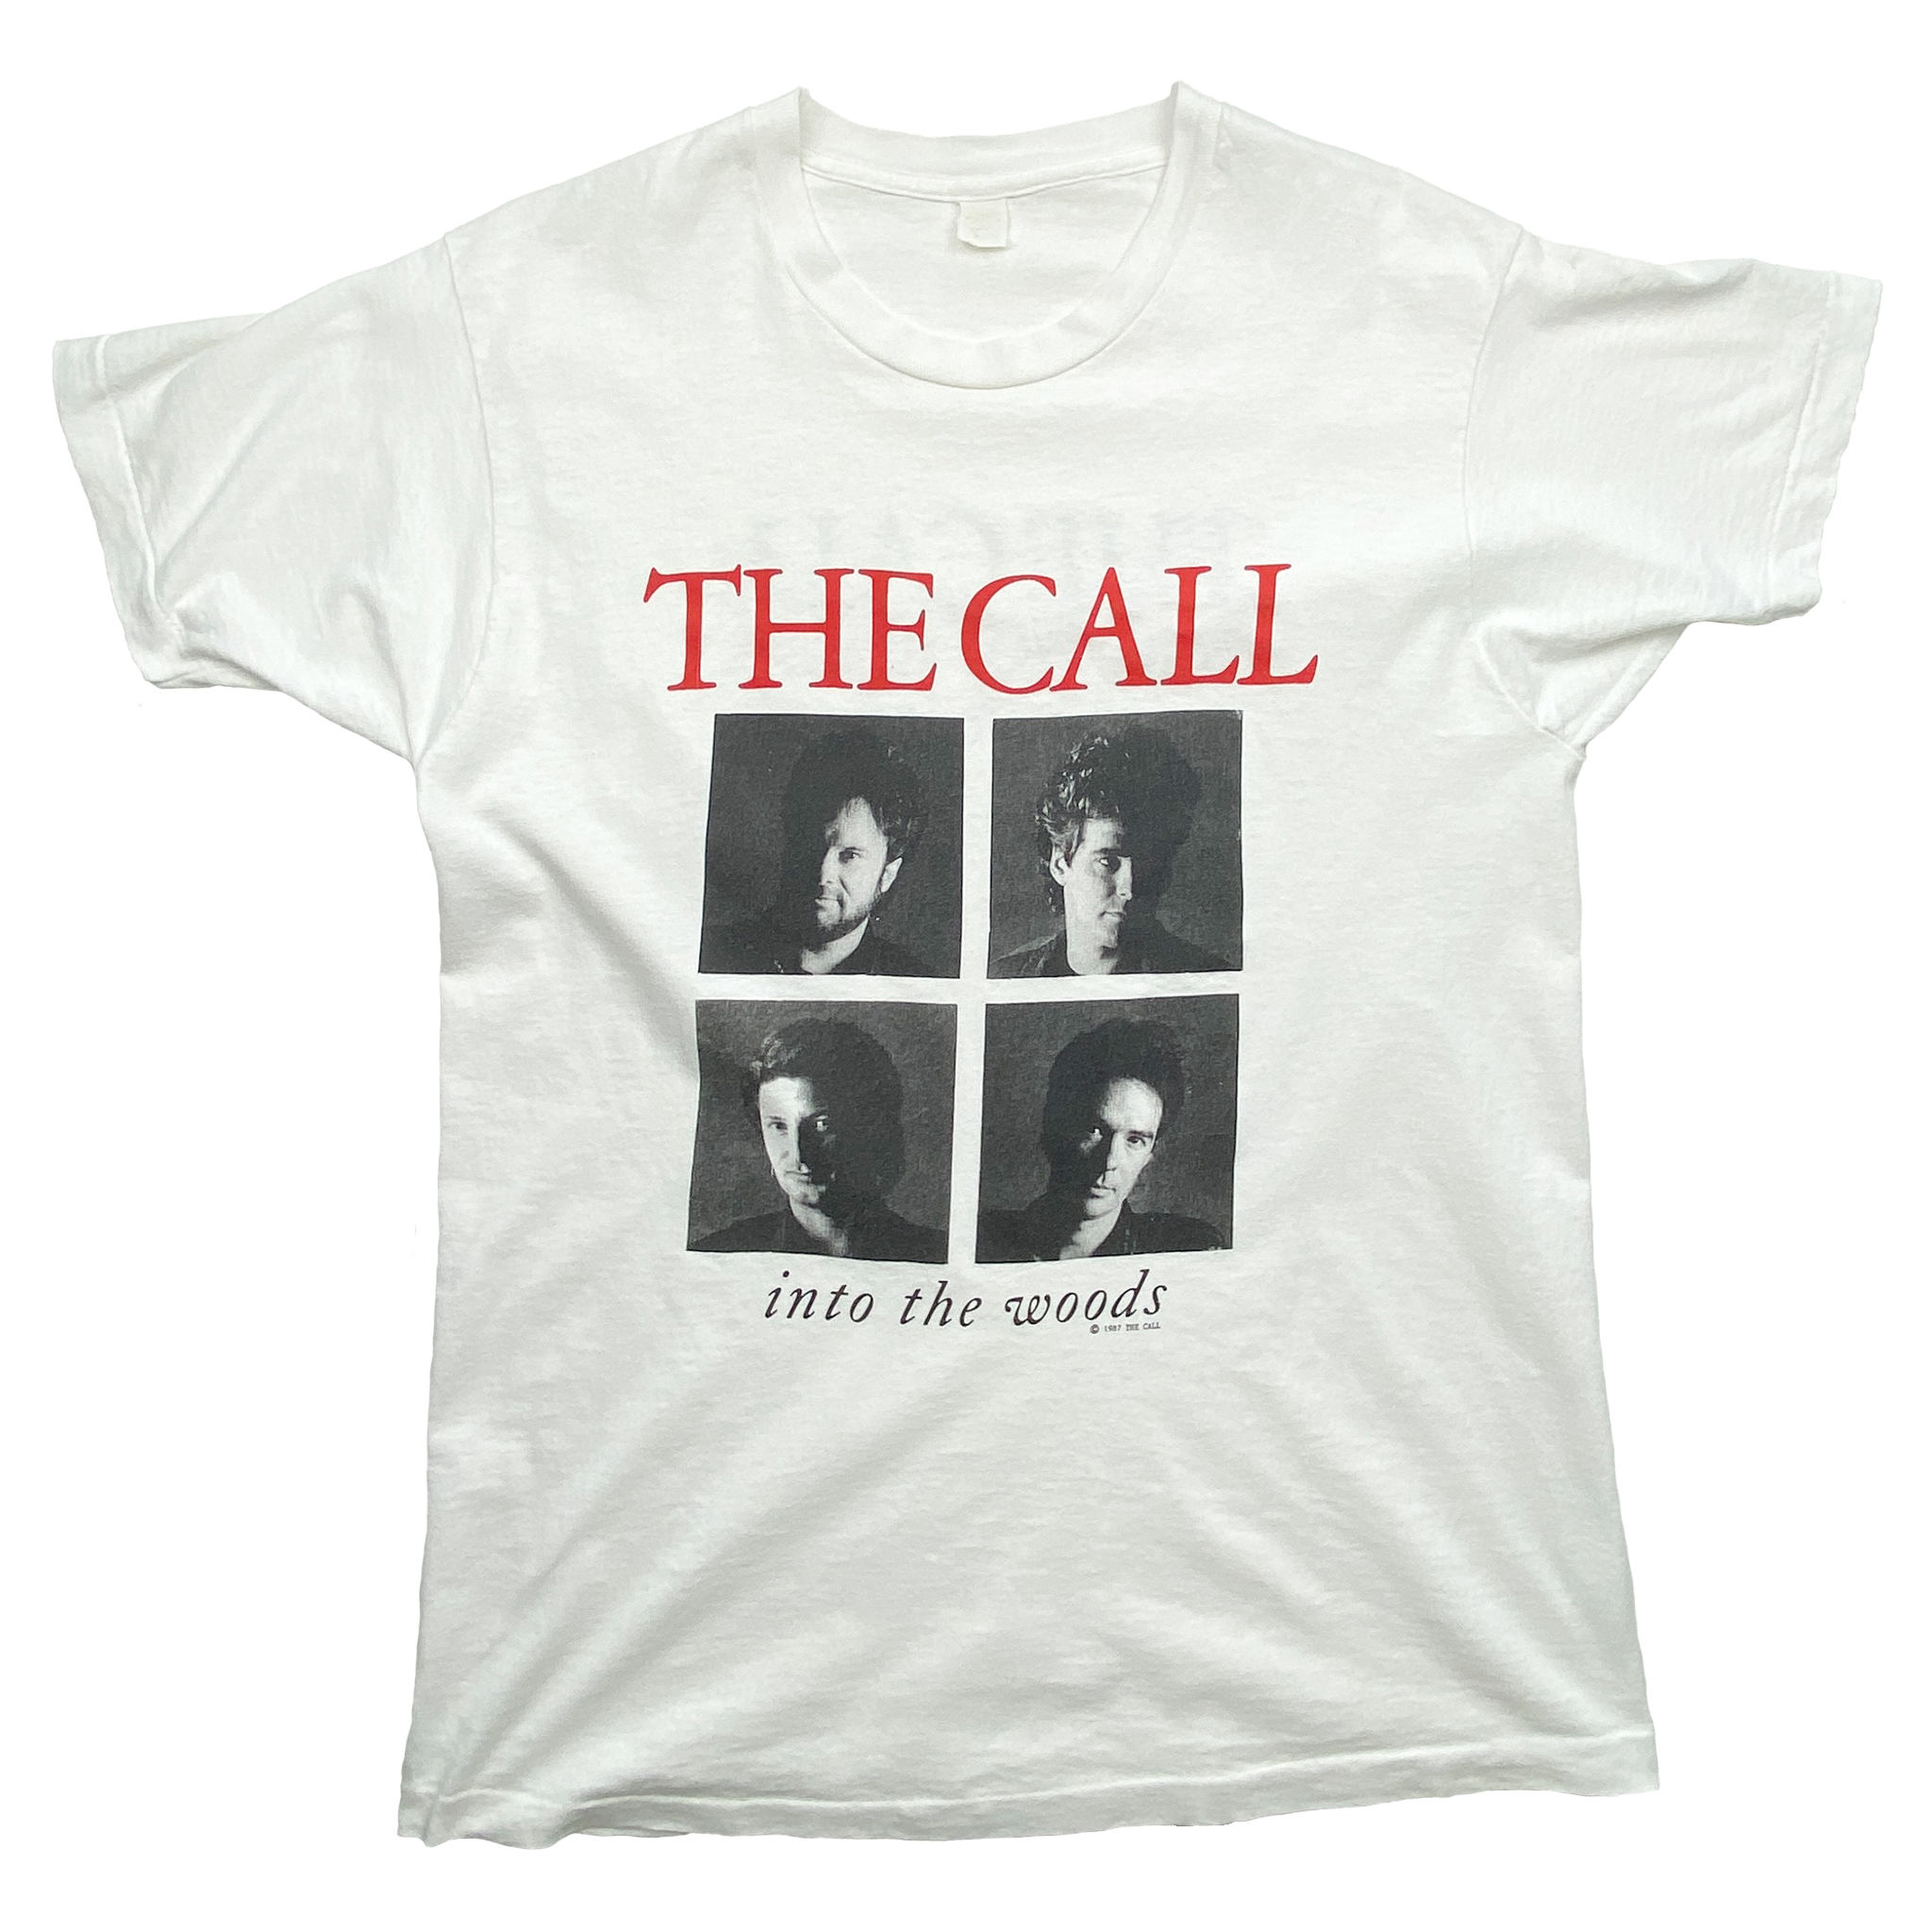 The Call "into the woods" T-Shirt (L)